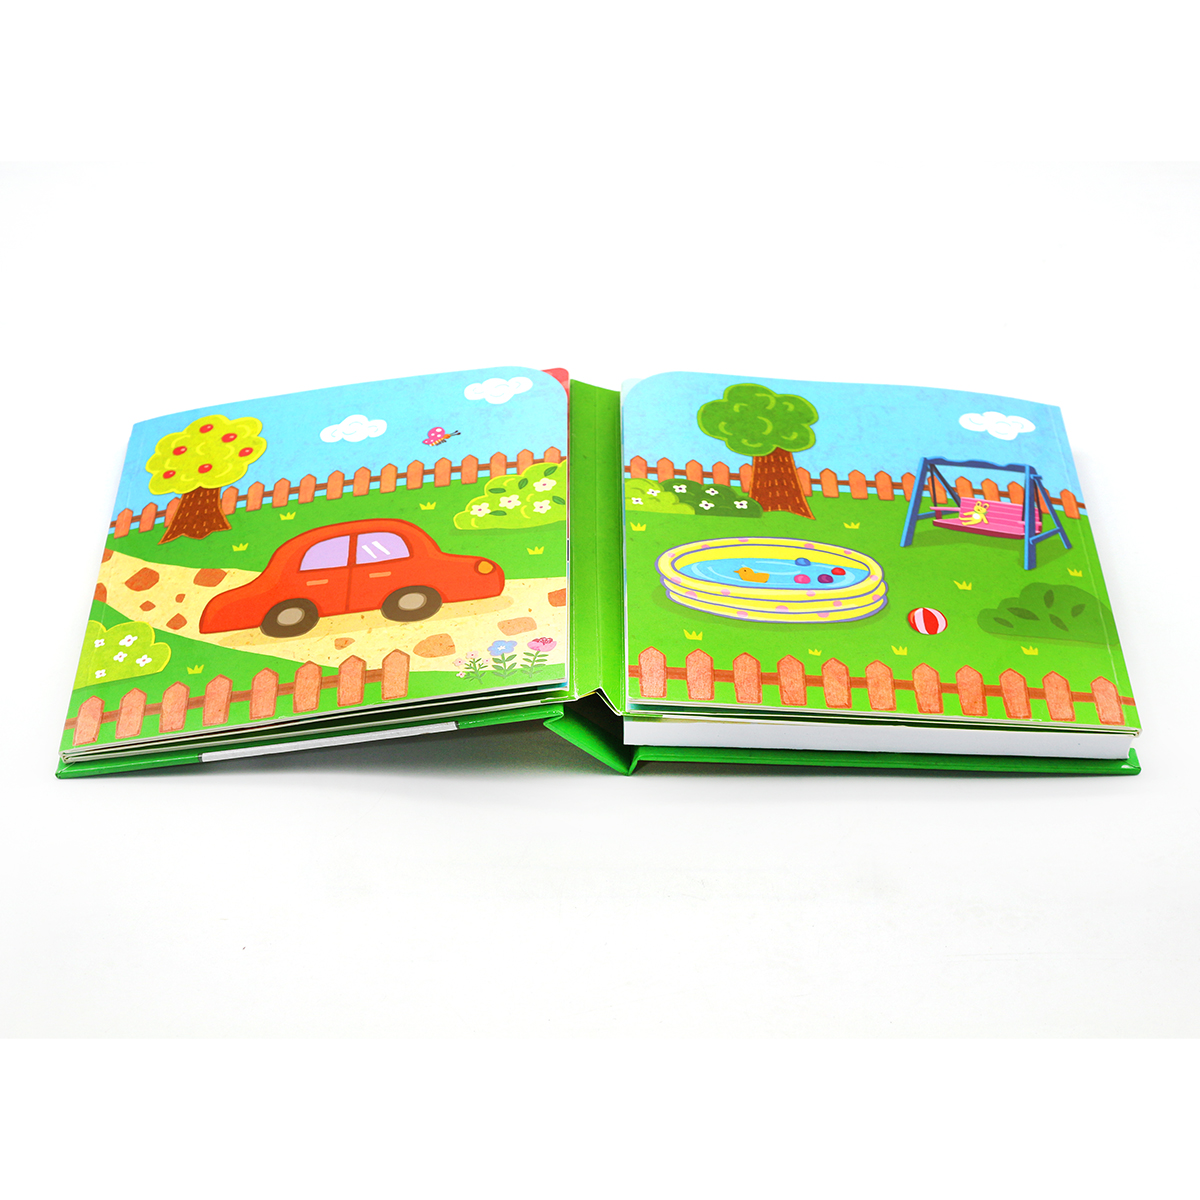 Hot sell high quality interesting educational 3D  books for kids custom book printing